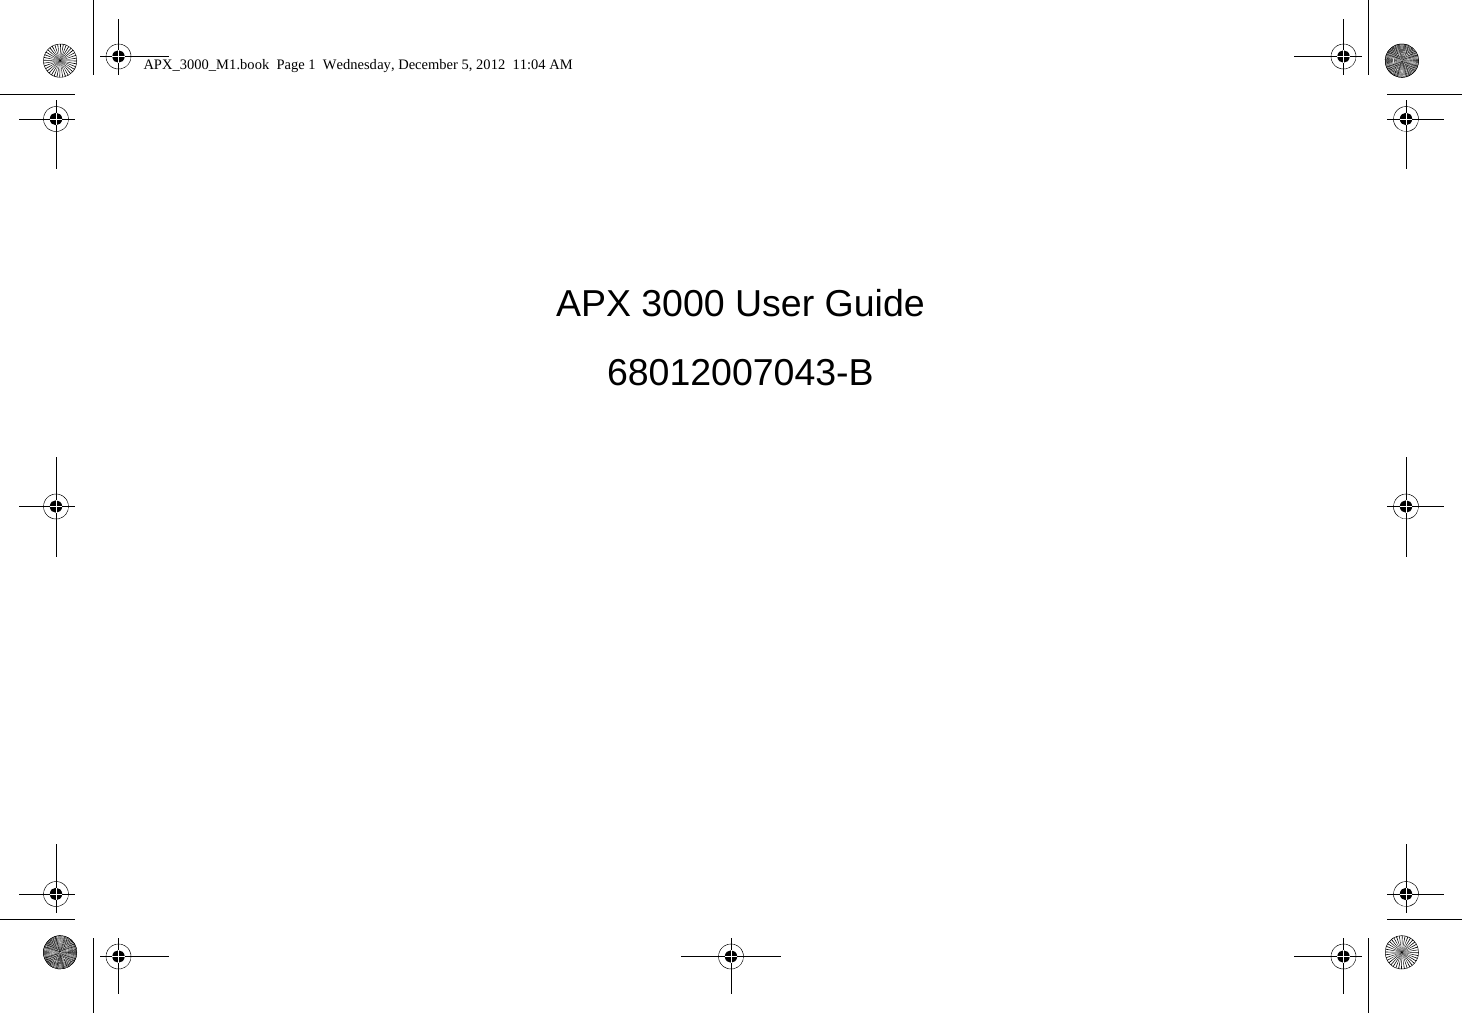 APX 3000 User Guide68012007043-BAPX_3000_M1.book  Page 1  Wednesday, December 5, 2012  11:04 AM